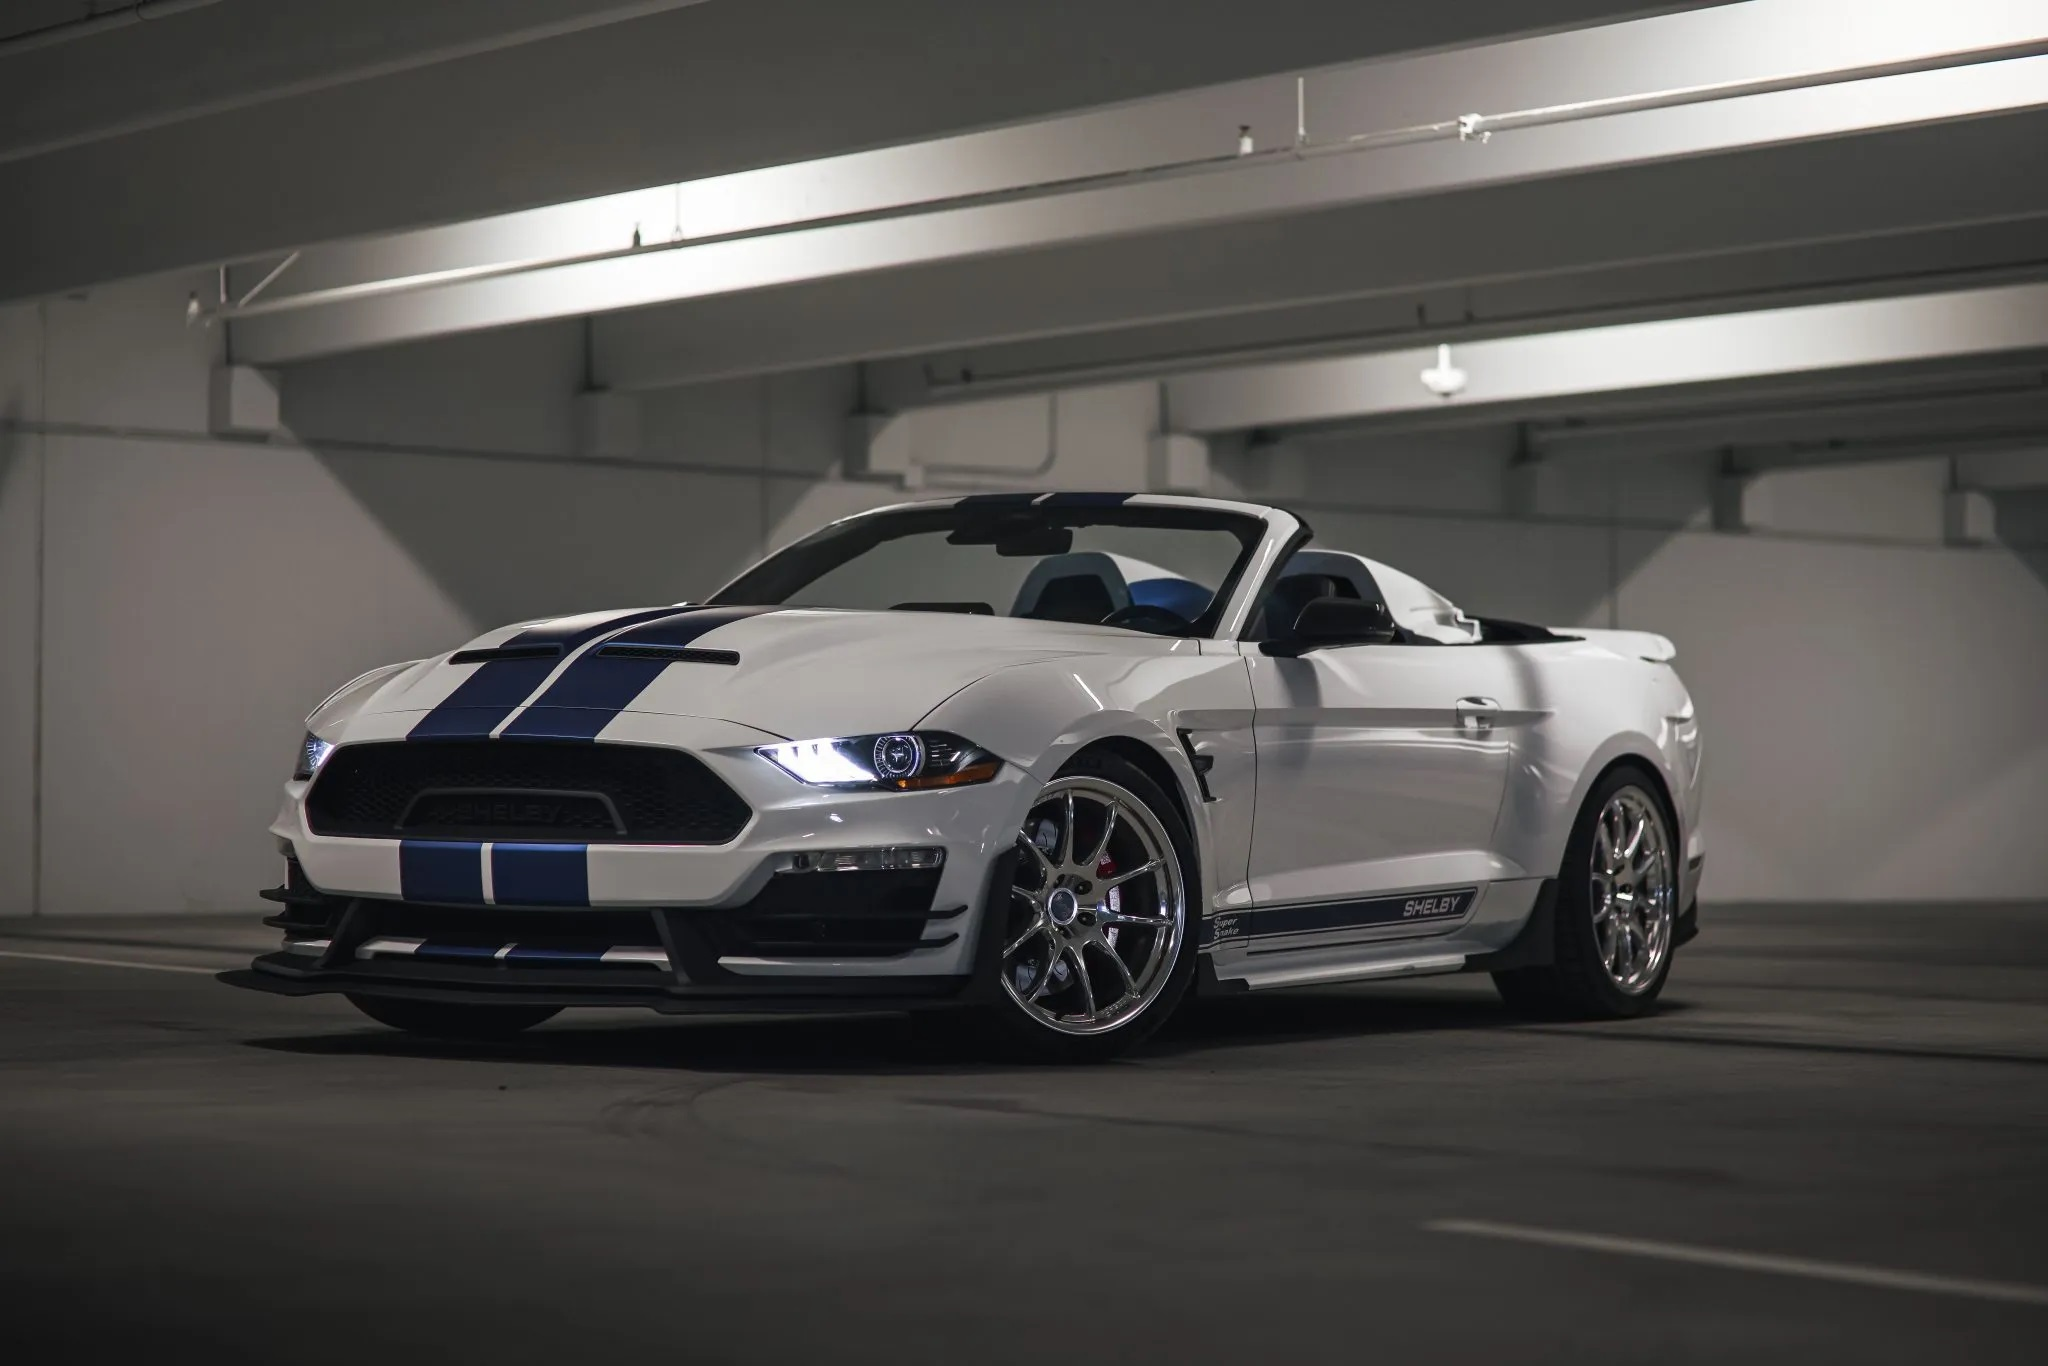 Rare 825 HP Shelby Super Snake Speedster With Just 78 Miles